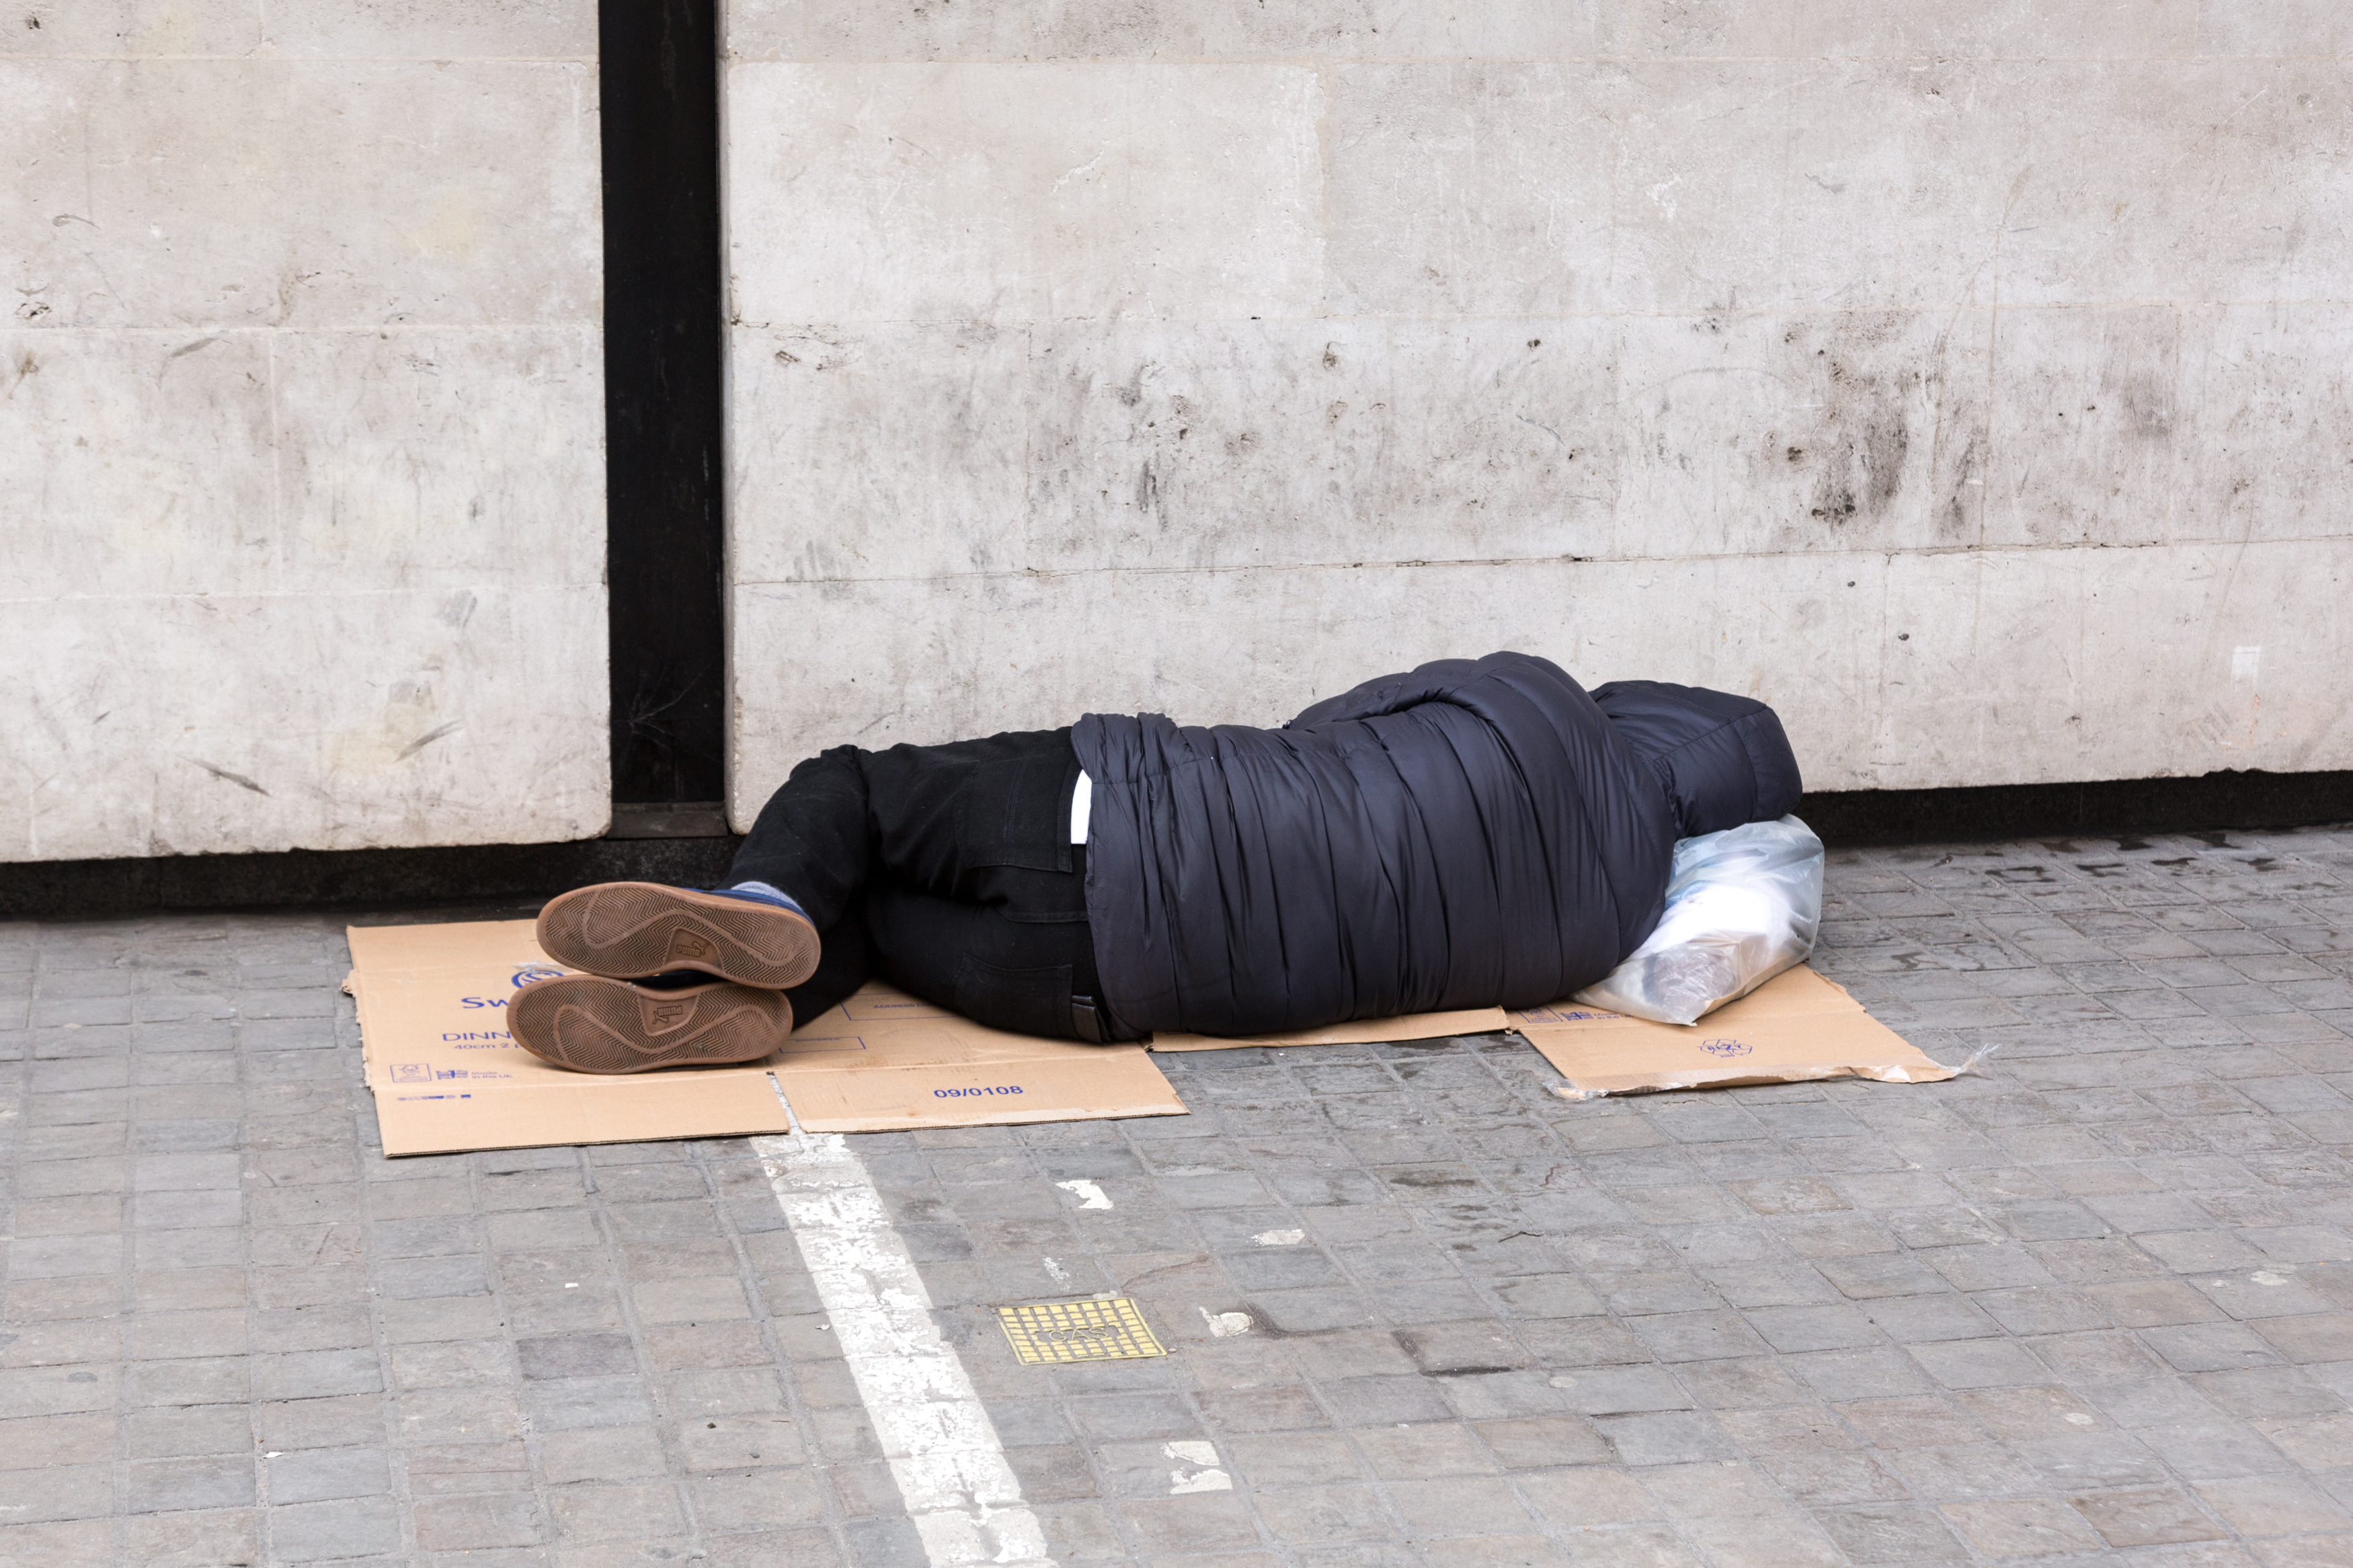 New partnership aims to support Coventry rough sleepers